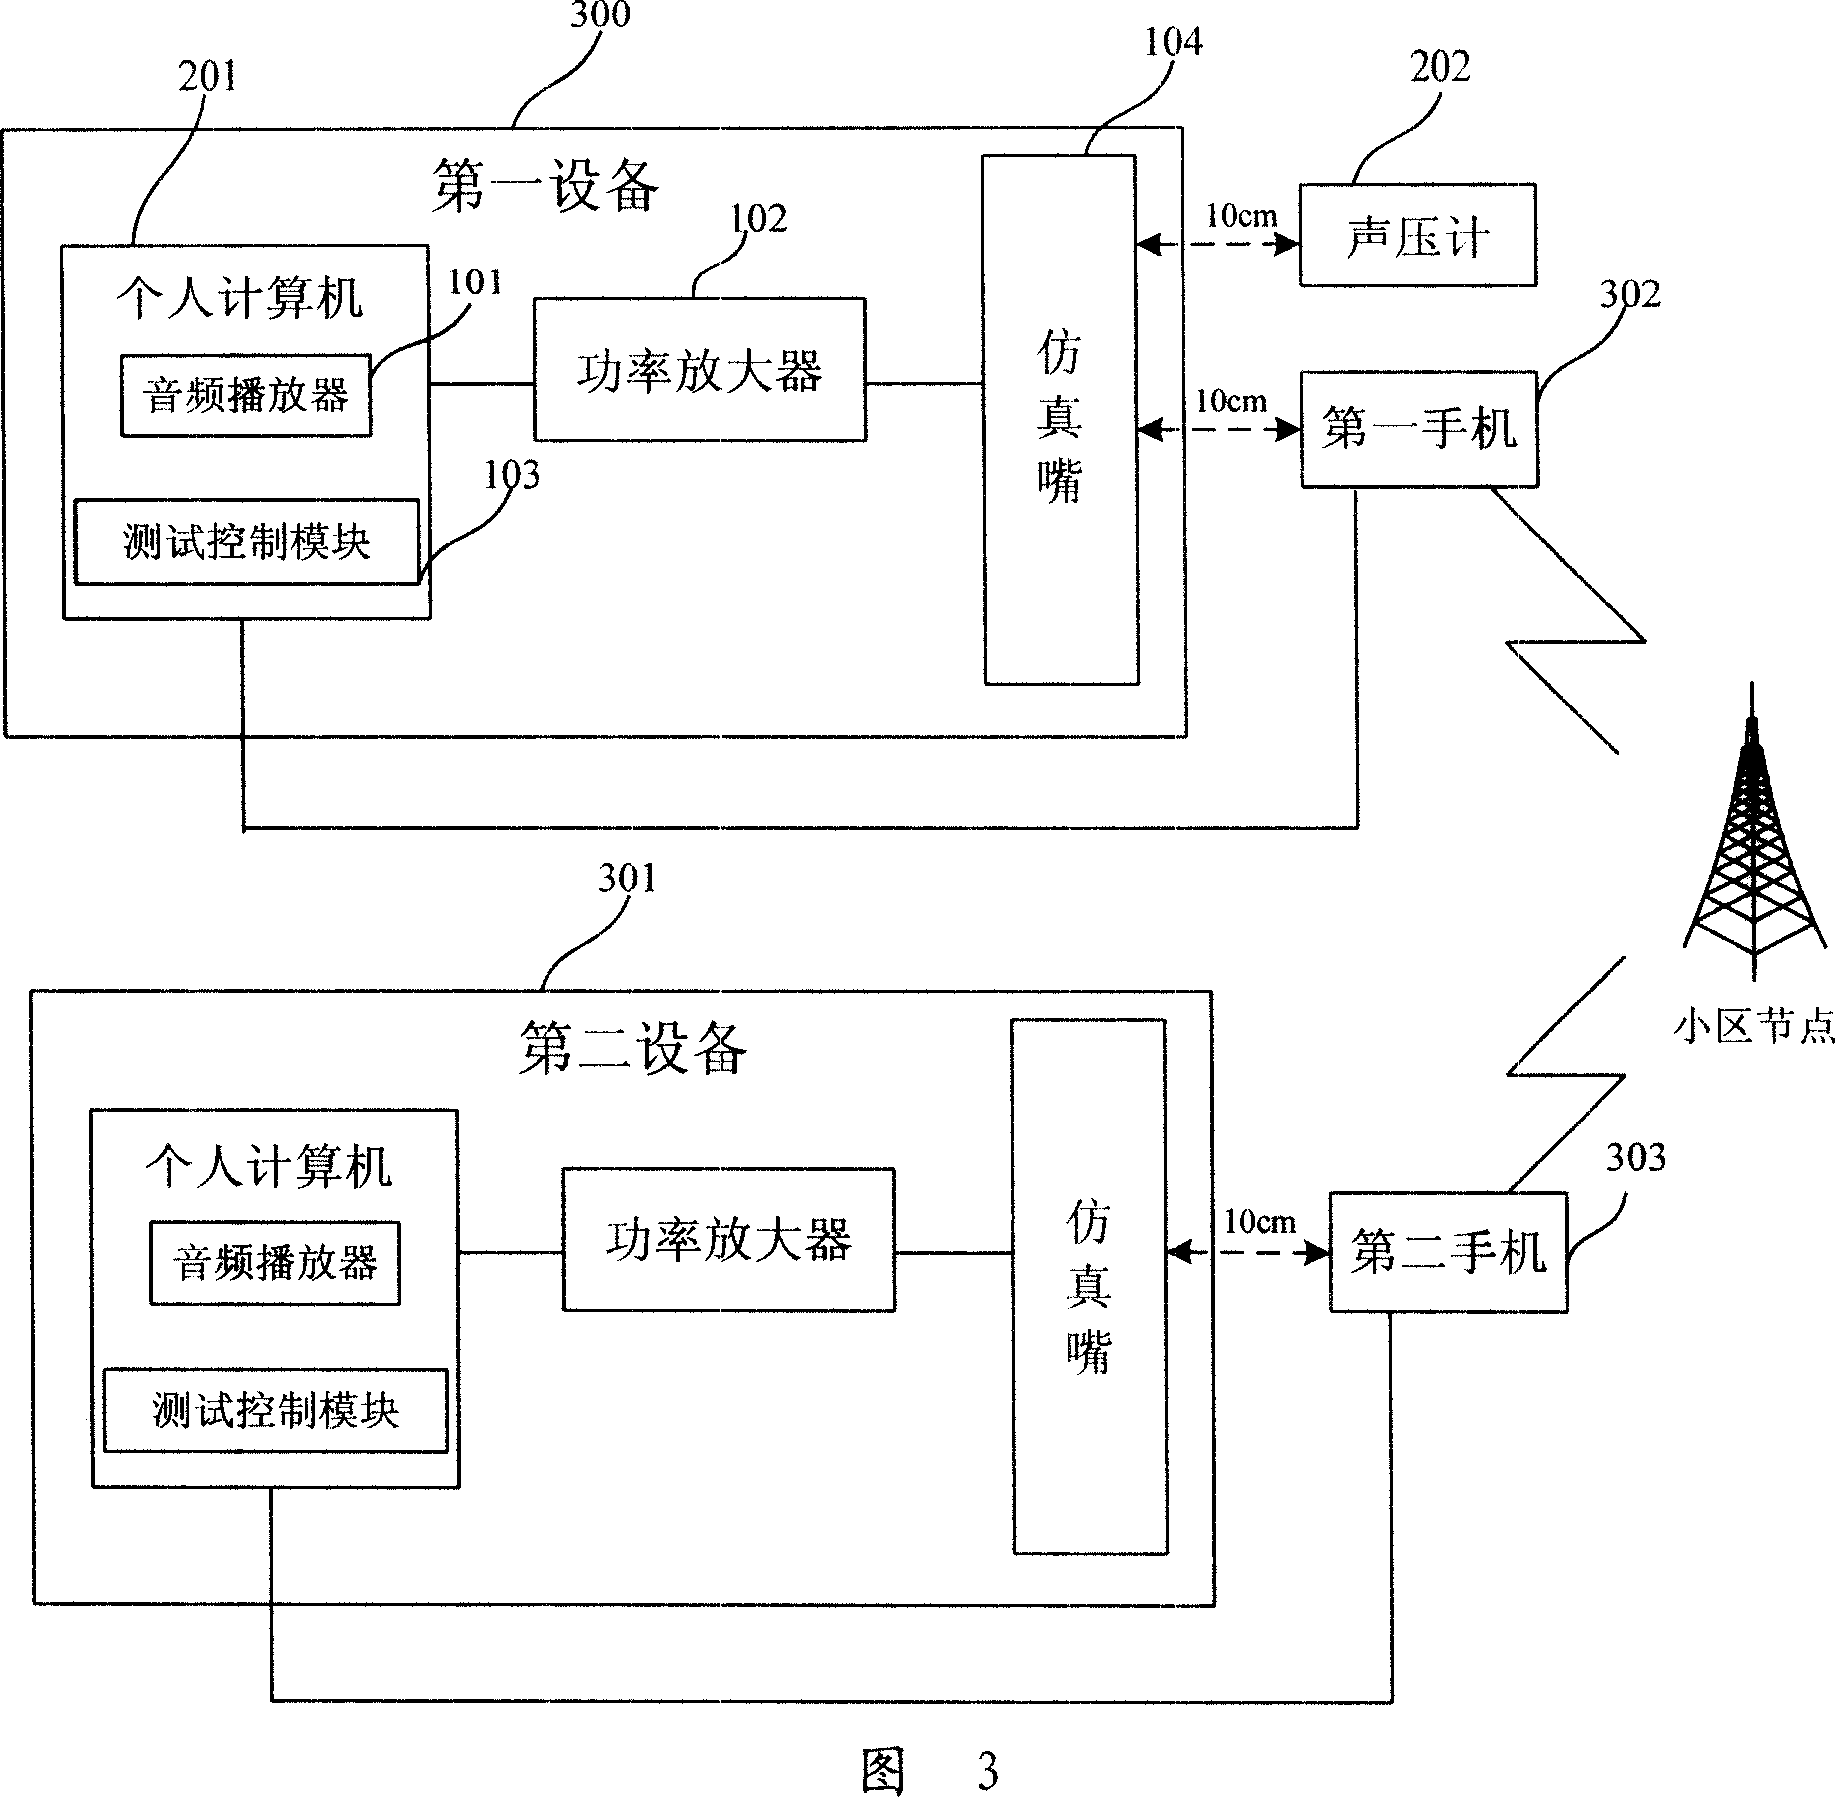 Equipment and method for testing mobile terminal telephony time